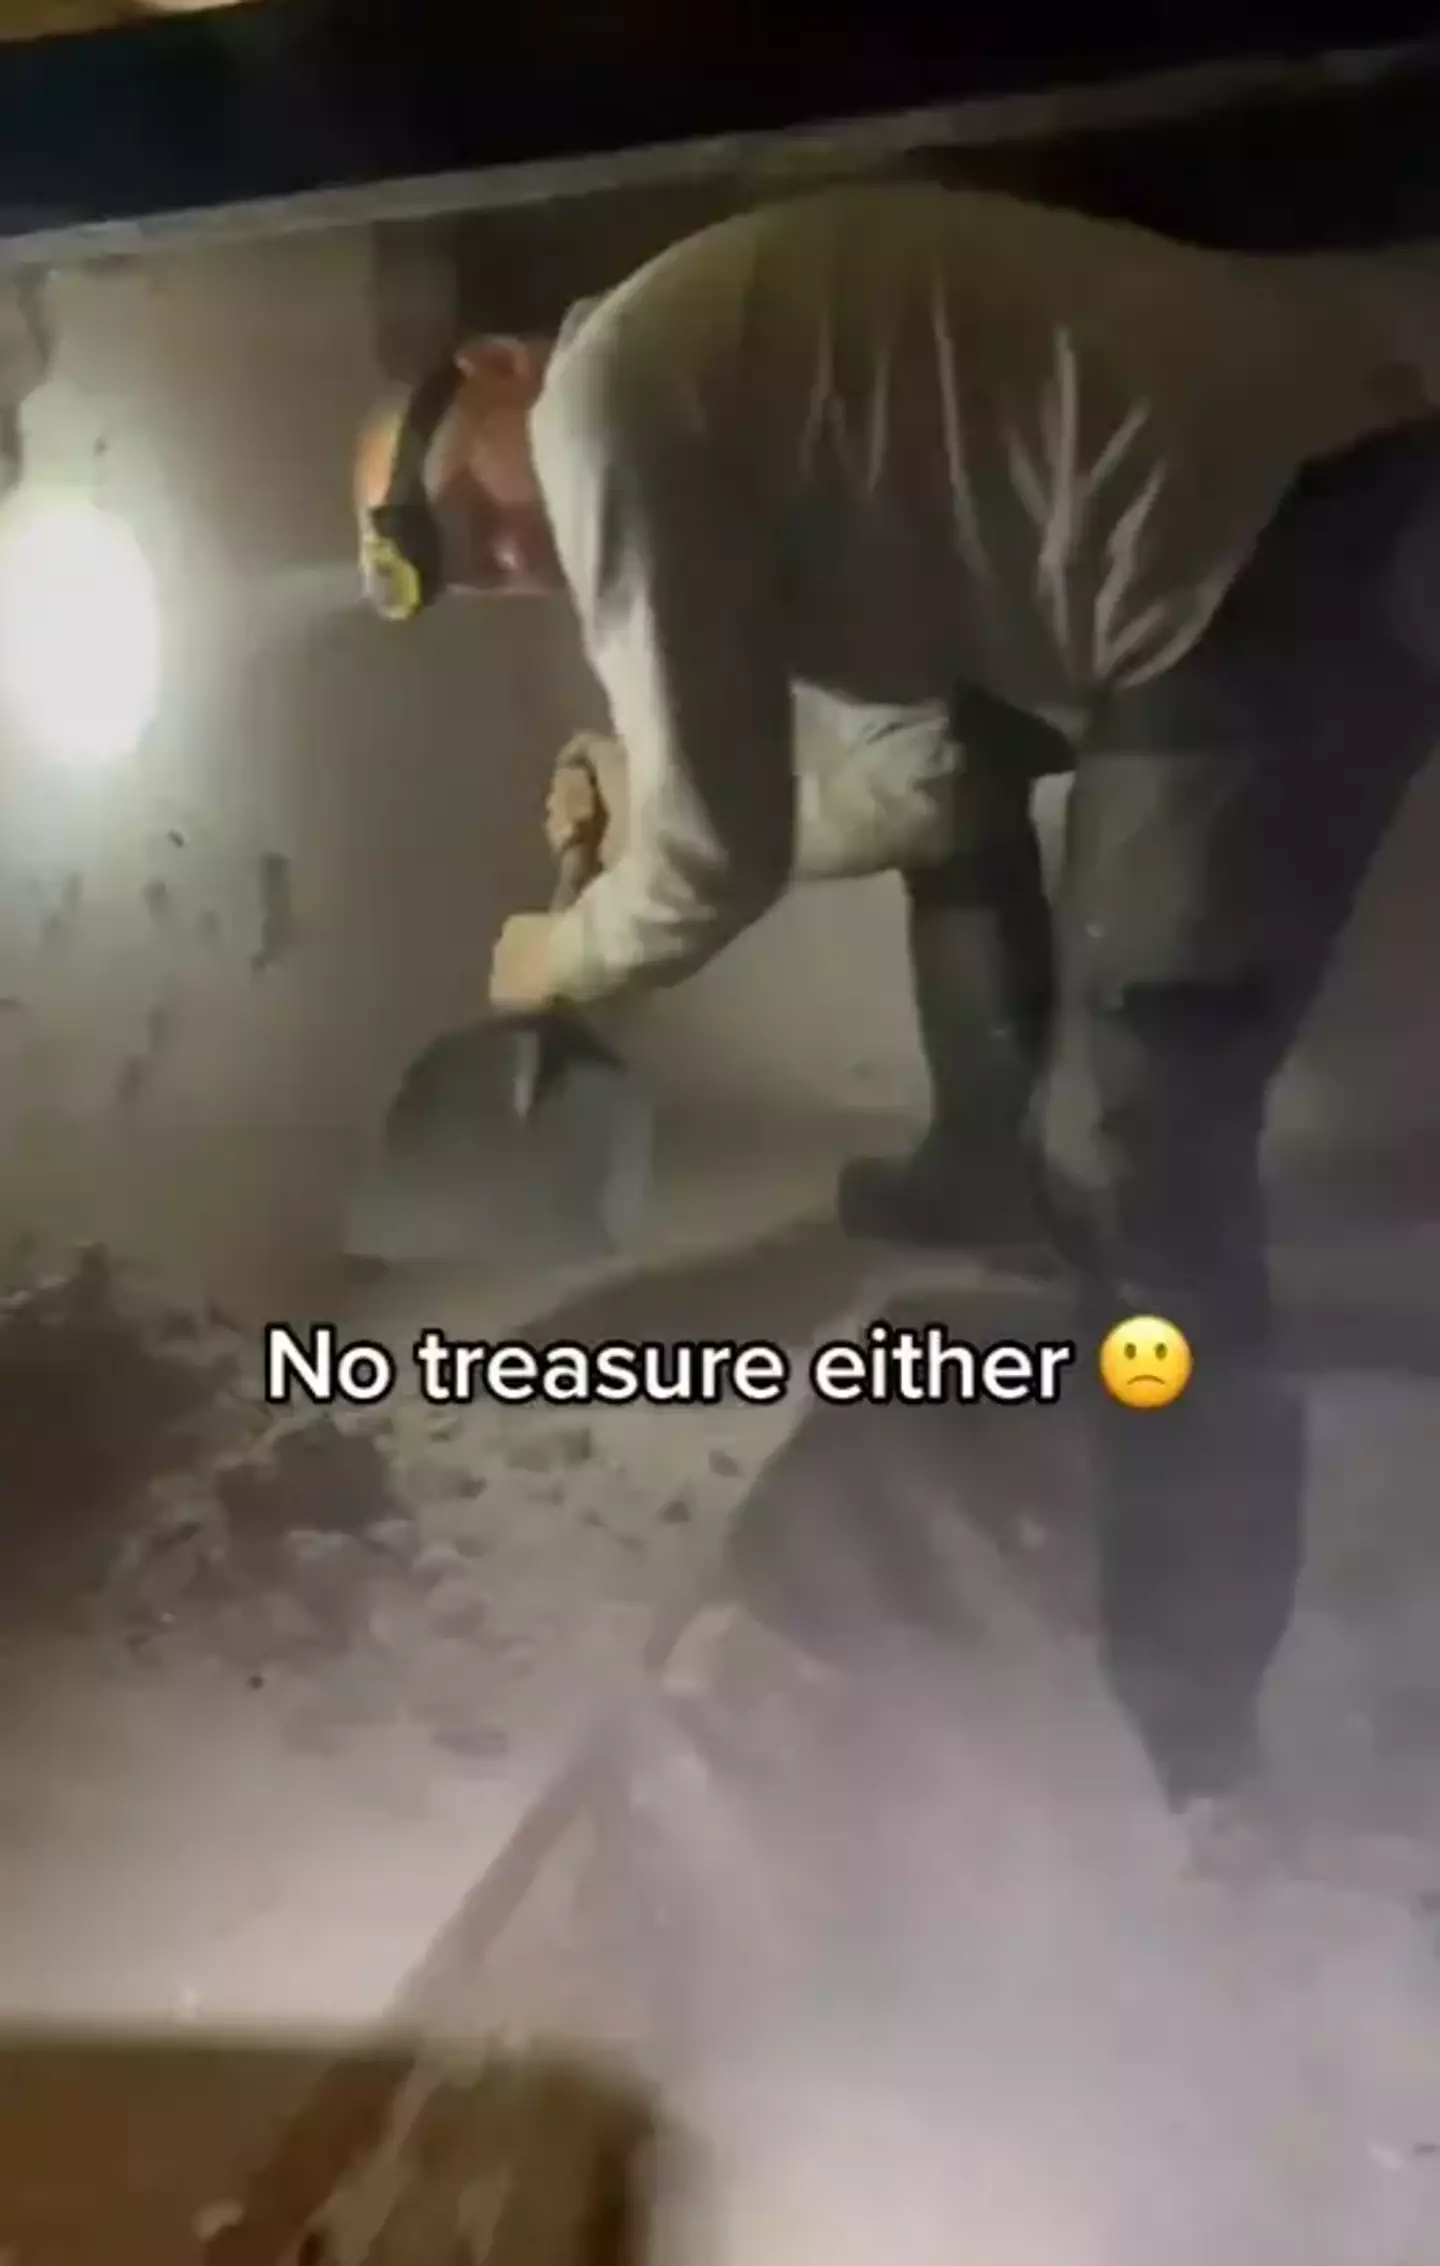 Jennifer confirmed that 'no treasure' was found.